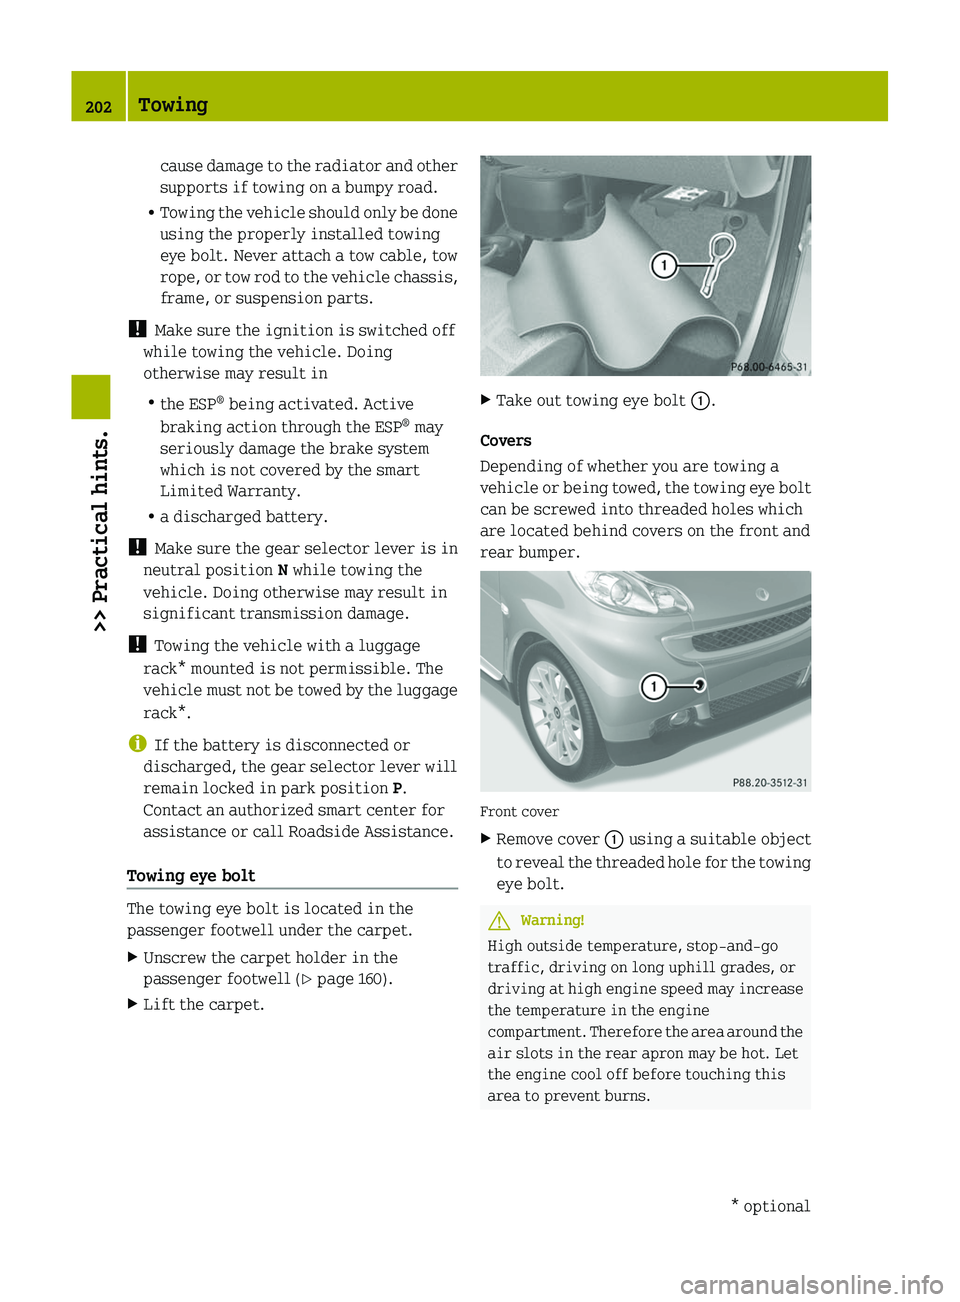 SMART FORTWO COUPE 2011  Owners Manual cause damage to the radiator and other
supports if towing on a bumpy road.
RTowing the vehicle should only be done
using the properly installed towing
eye bolt. Never attach a tow cable, tow
rope, or 